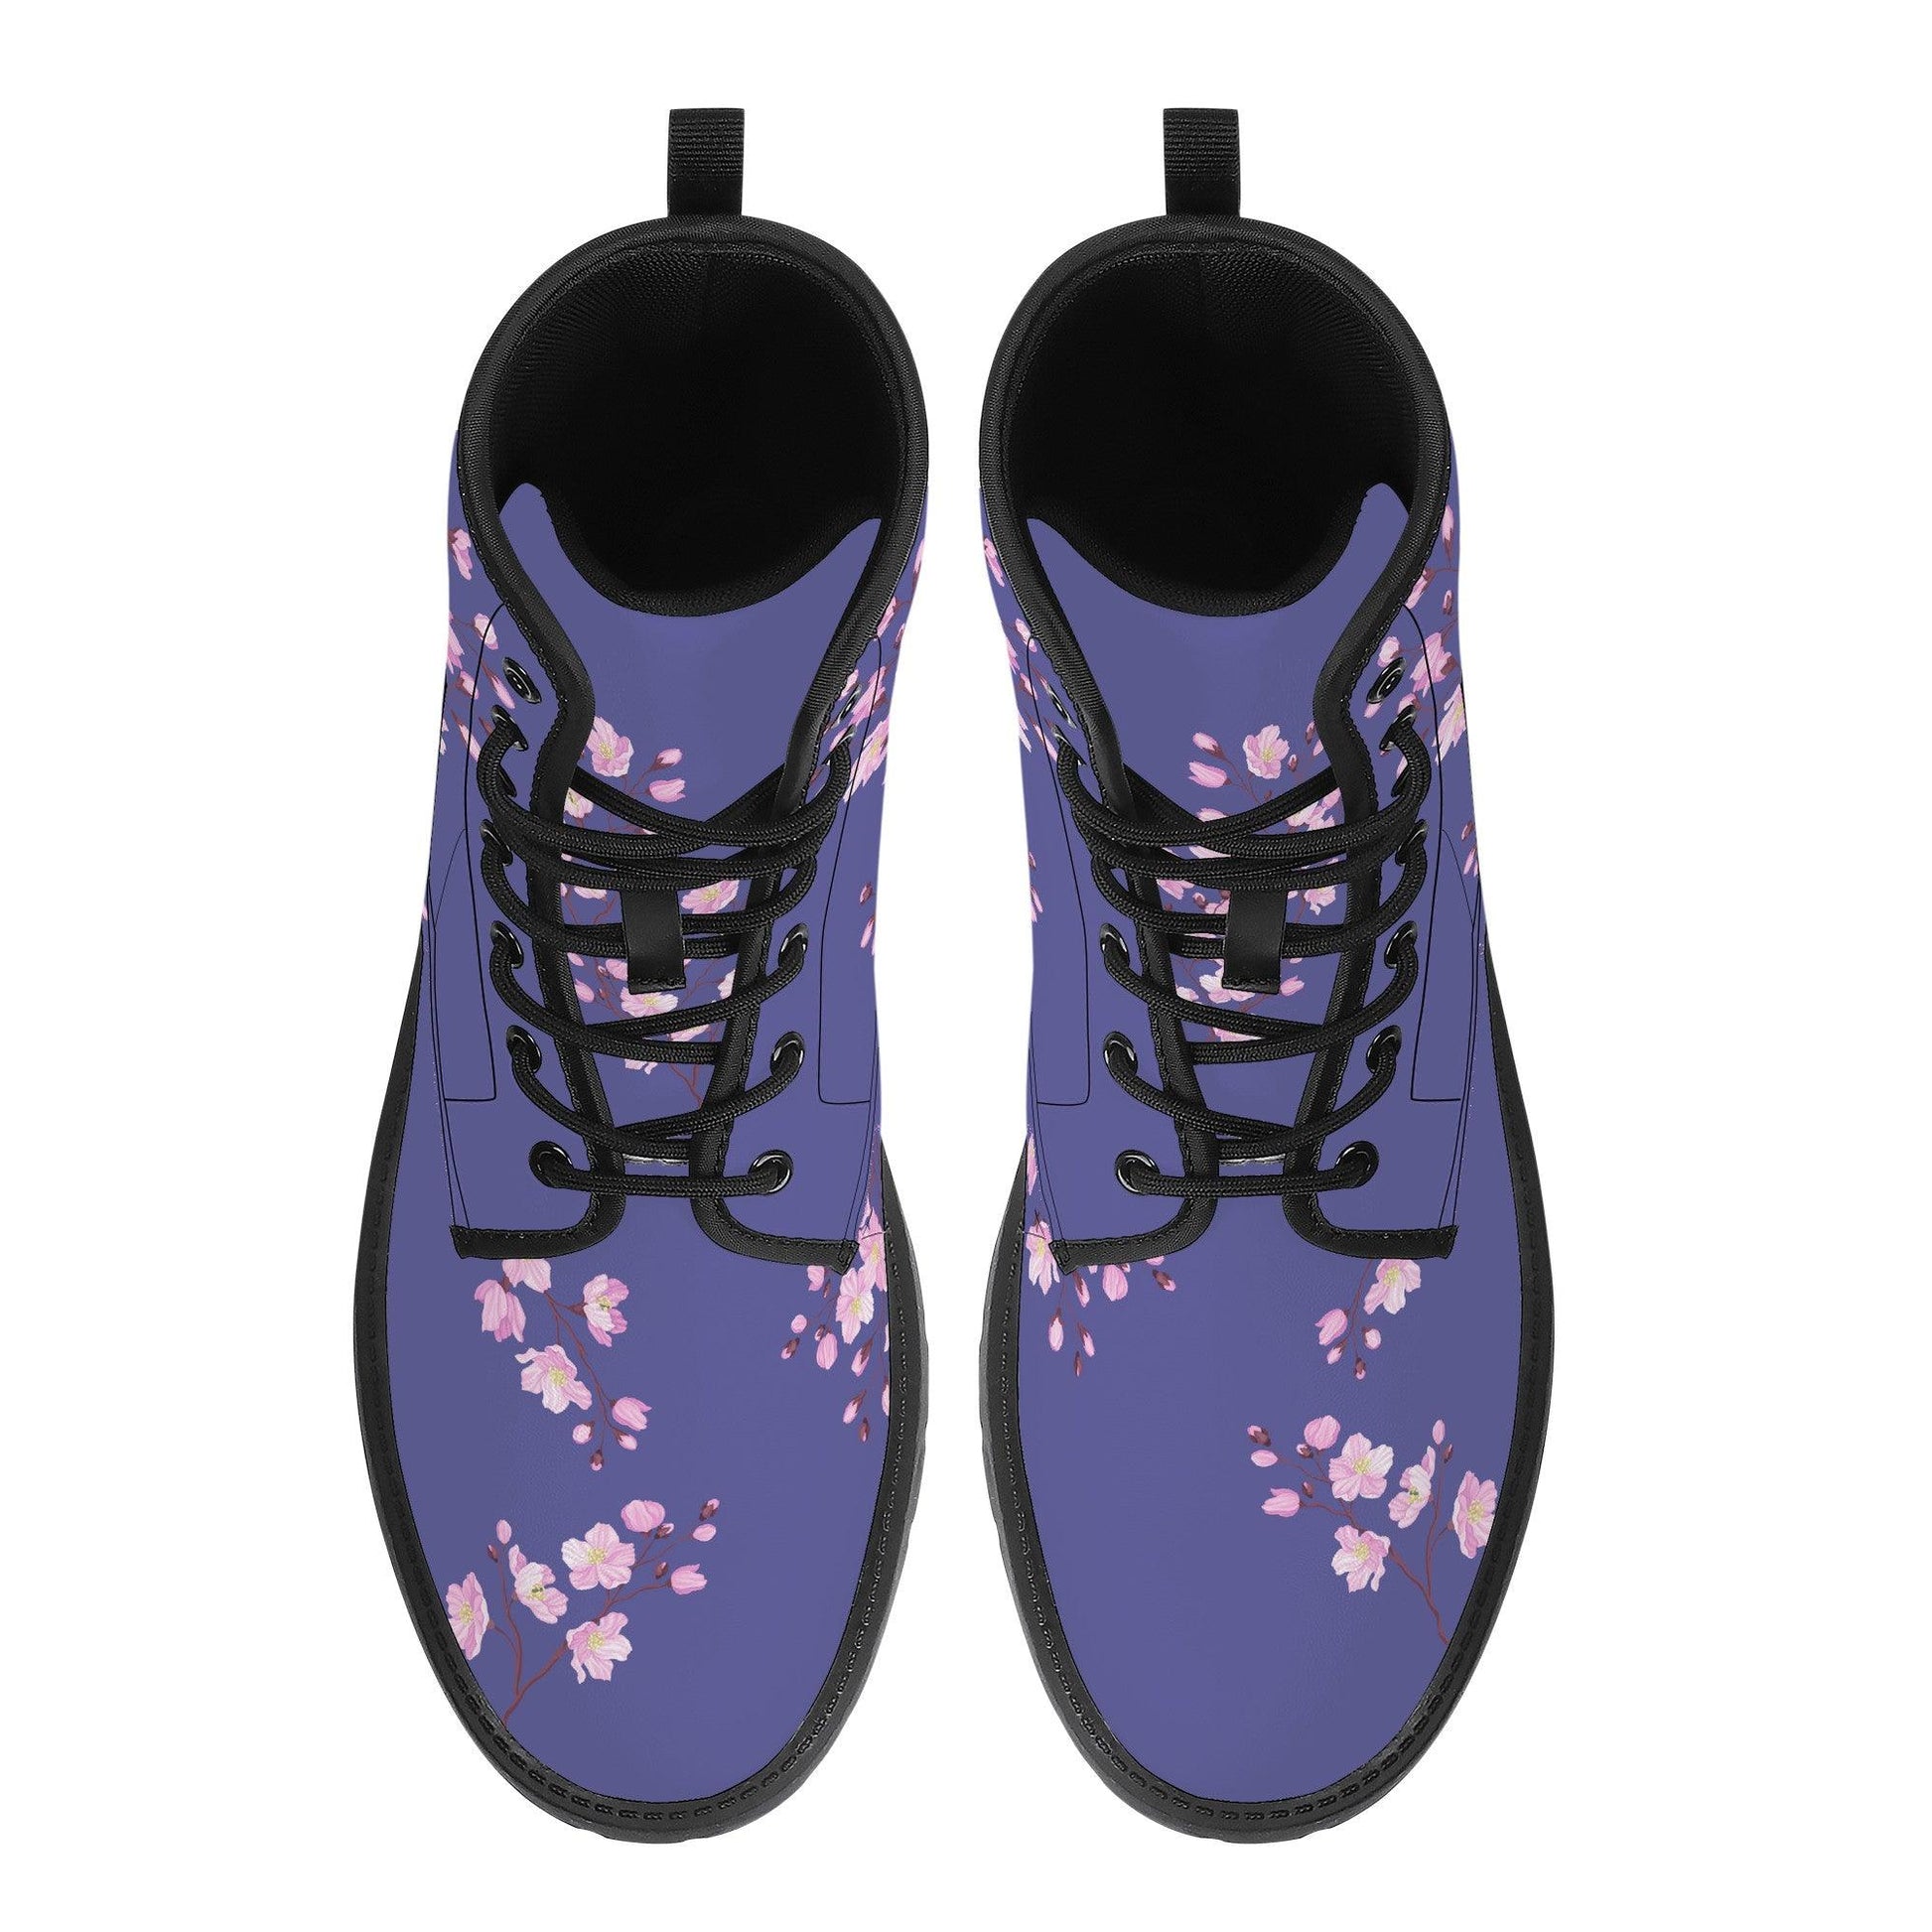 Purple Vegan Leather Boots with Cherry Blossom